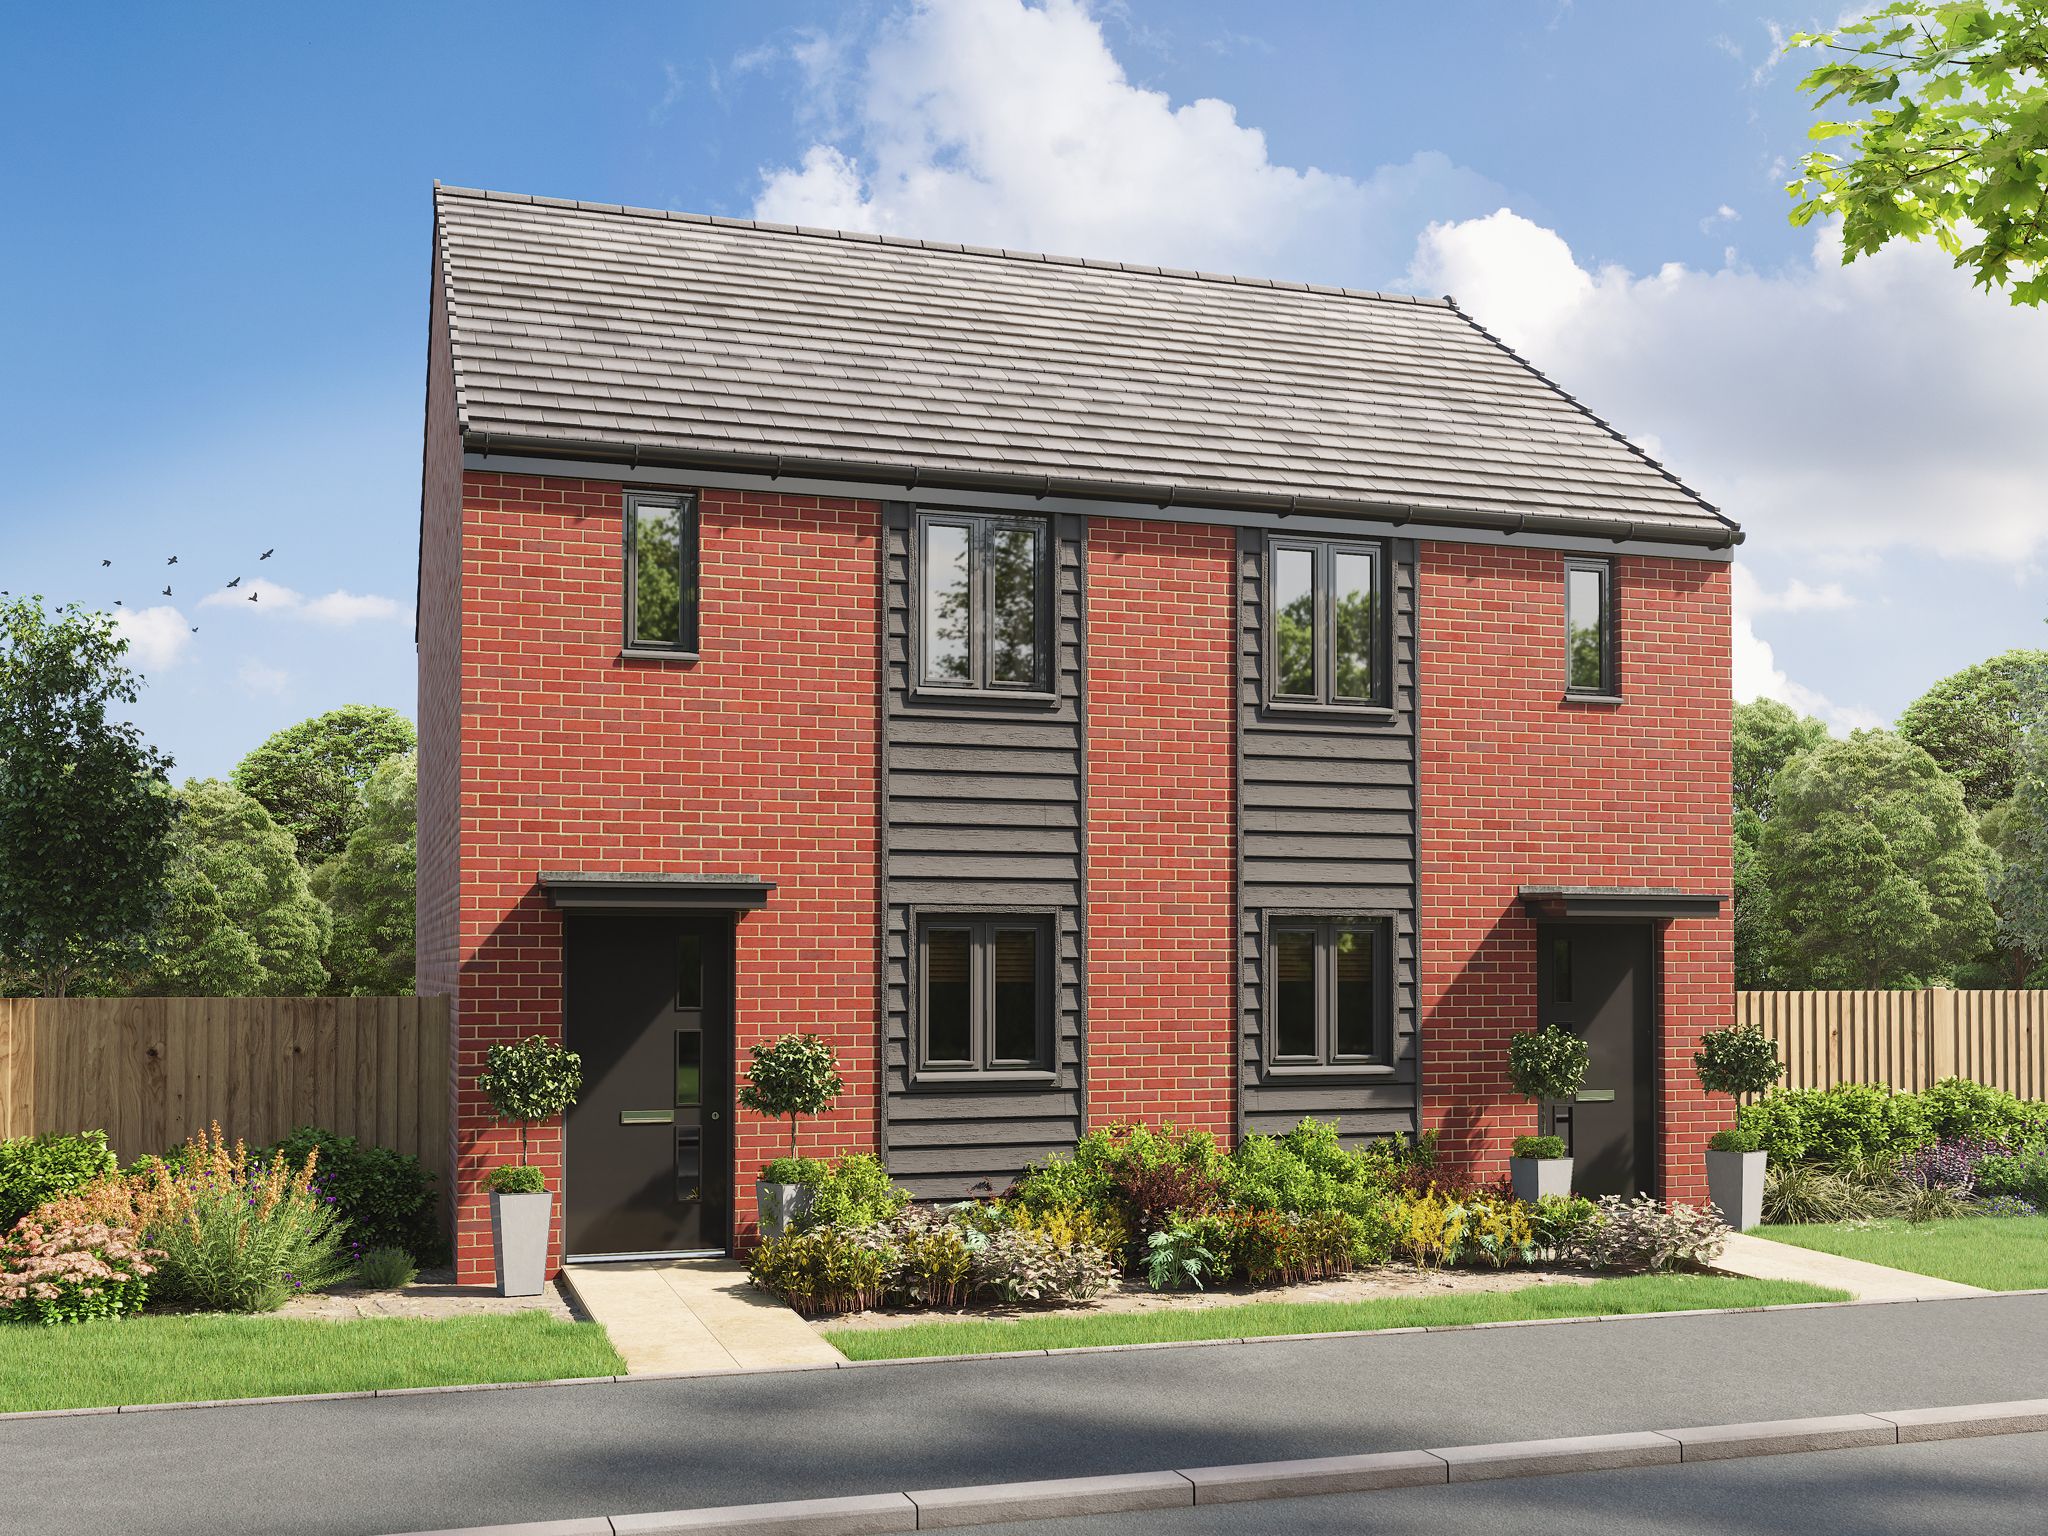 Lakedale at Whiteley Meadows development image 1 of 1